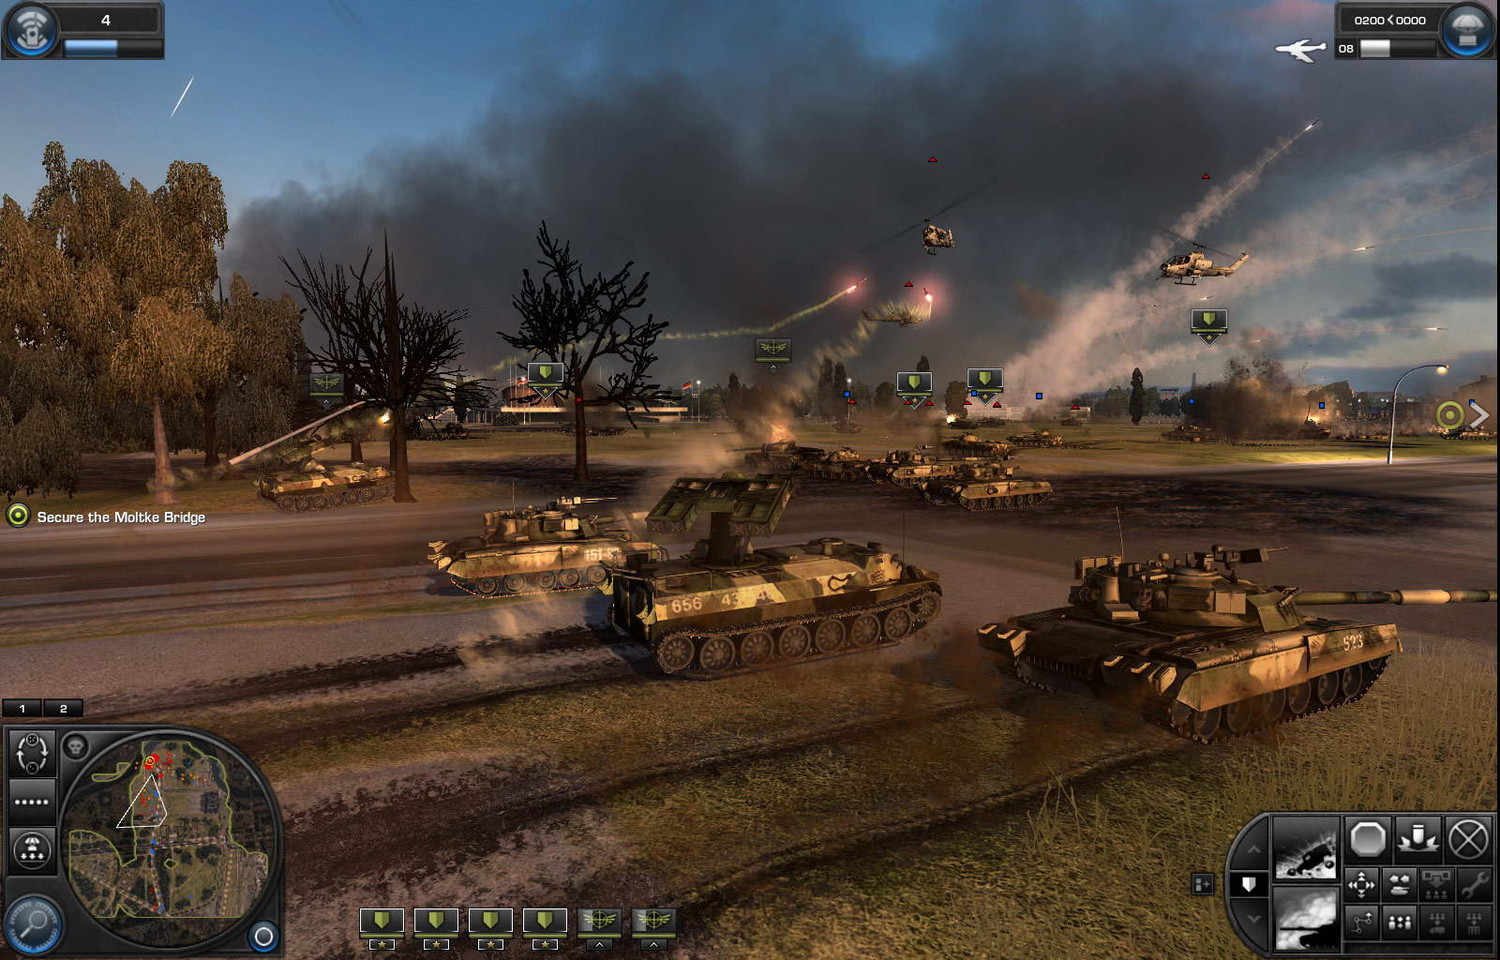 Скриншот 1 к игре World in Conflict: Complete Edition (2009) PC | RePack by xatab